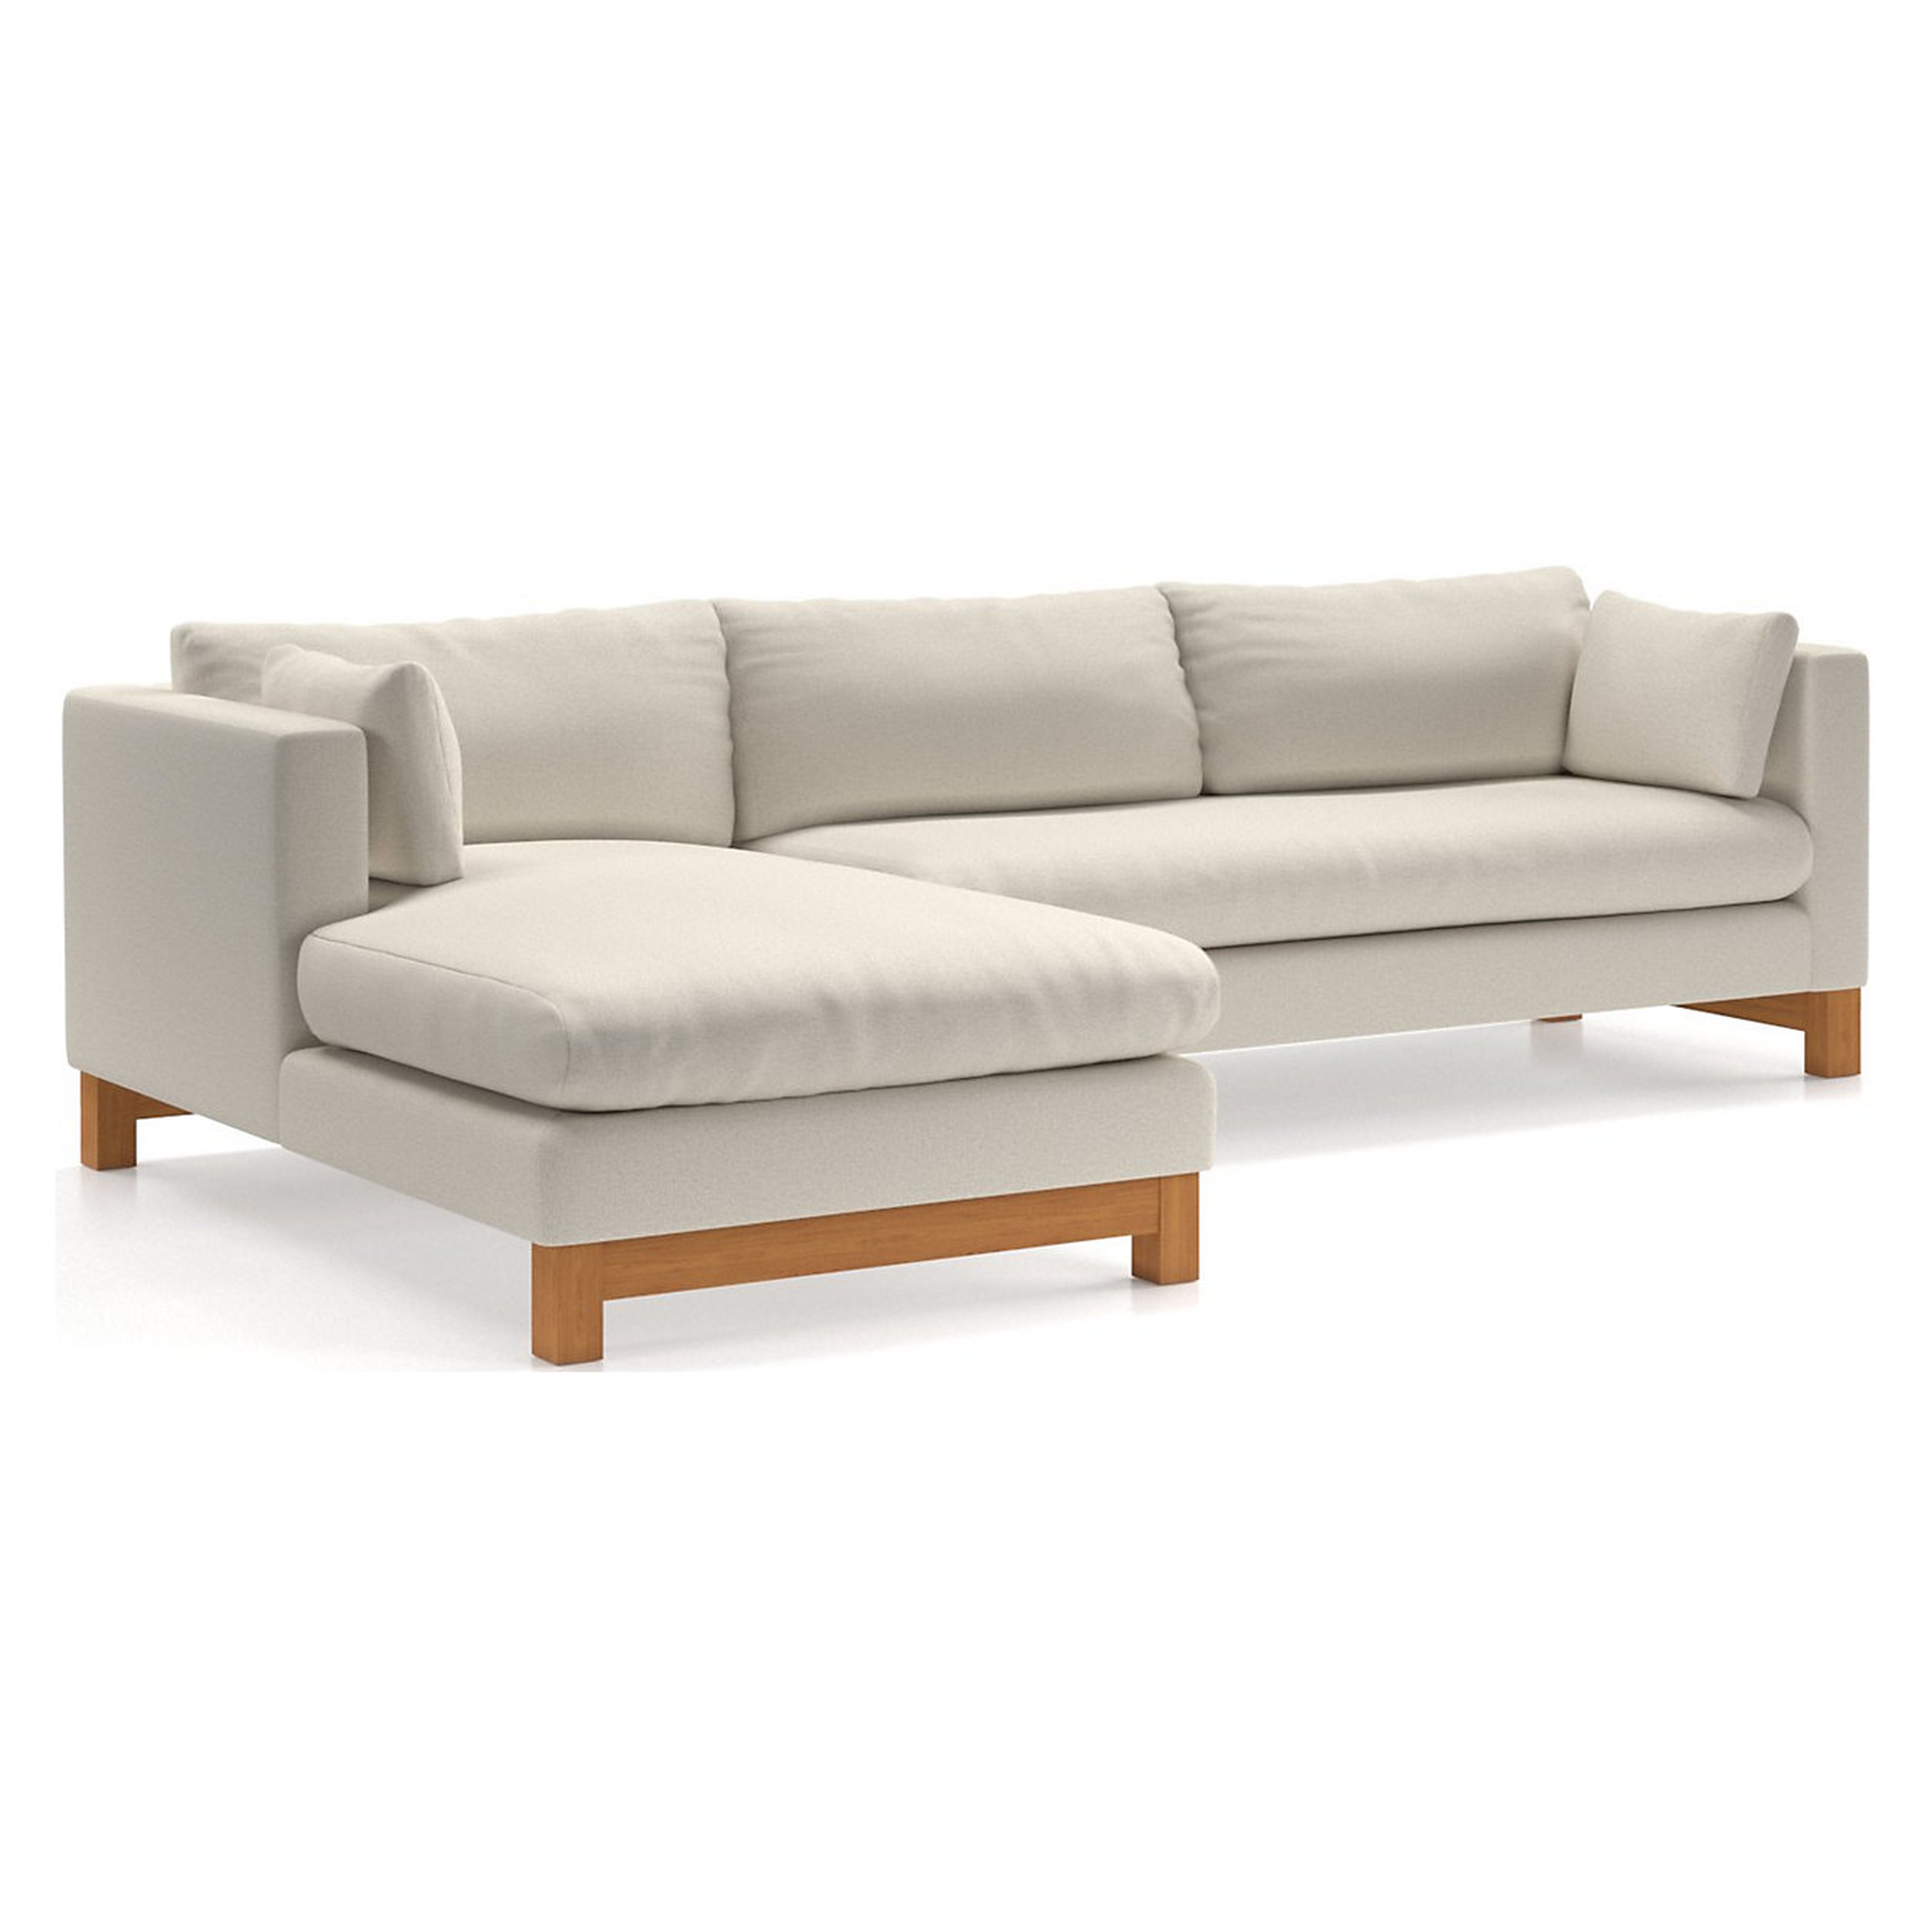 Pacific 2-Piece Chaise Sectional Sofa with Wood Legs - Crate and Barrel